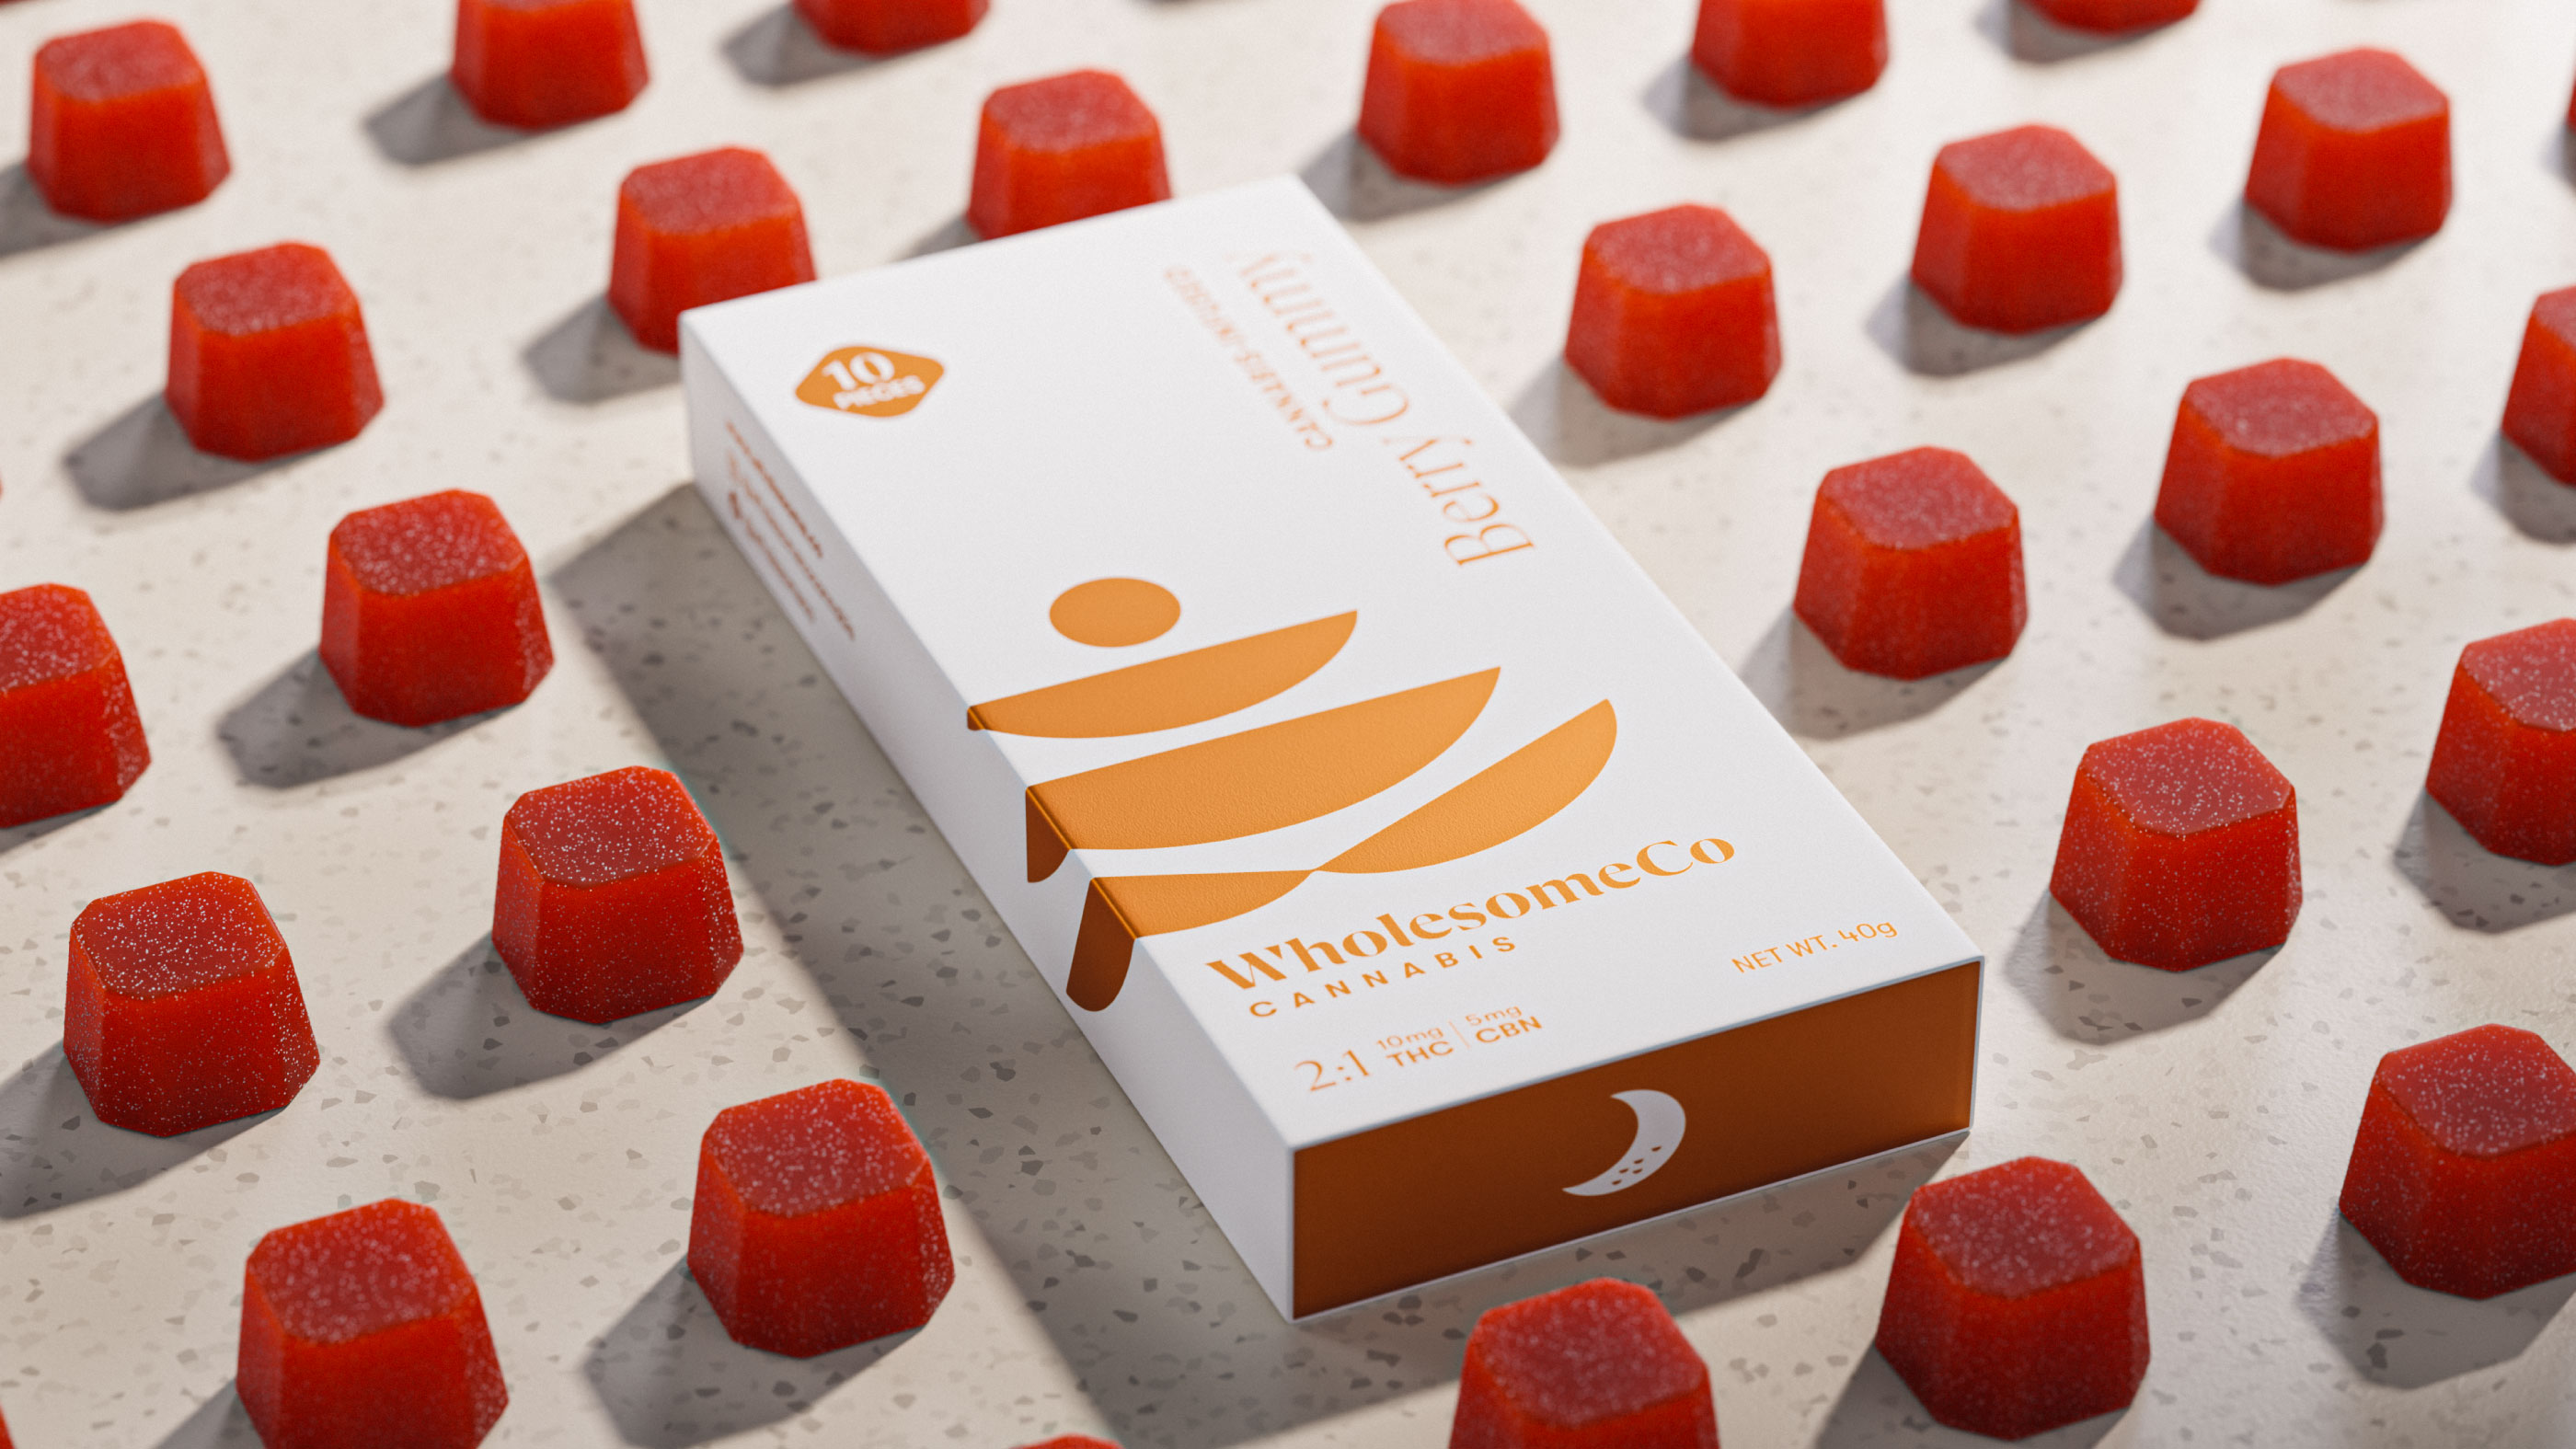 WholesomeCo Cannabis Brand Design for a Natural Path to Health and Wellness